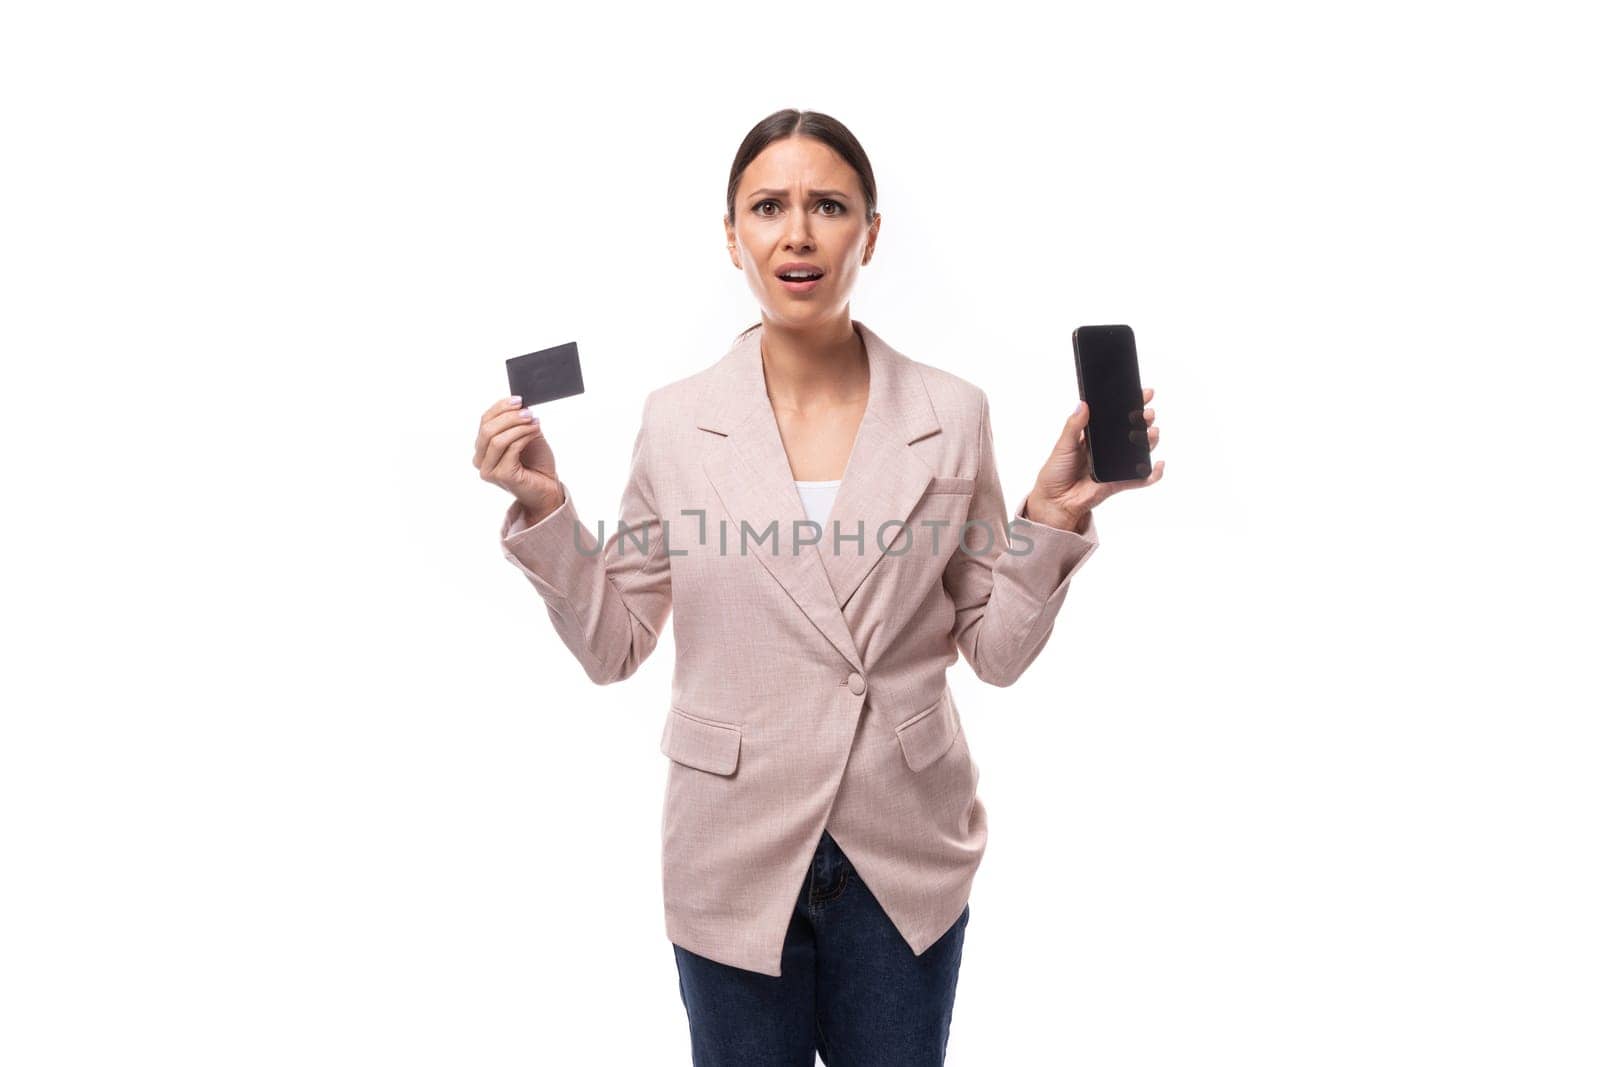 pleasant young woman with black hair in a jacket holding a credit card and a smartphone on a white background with copy space.